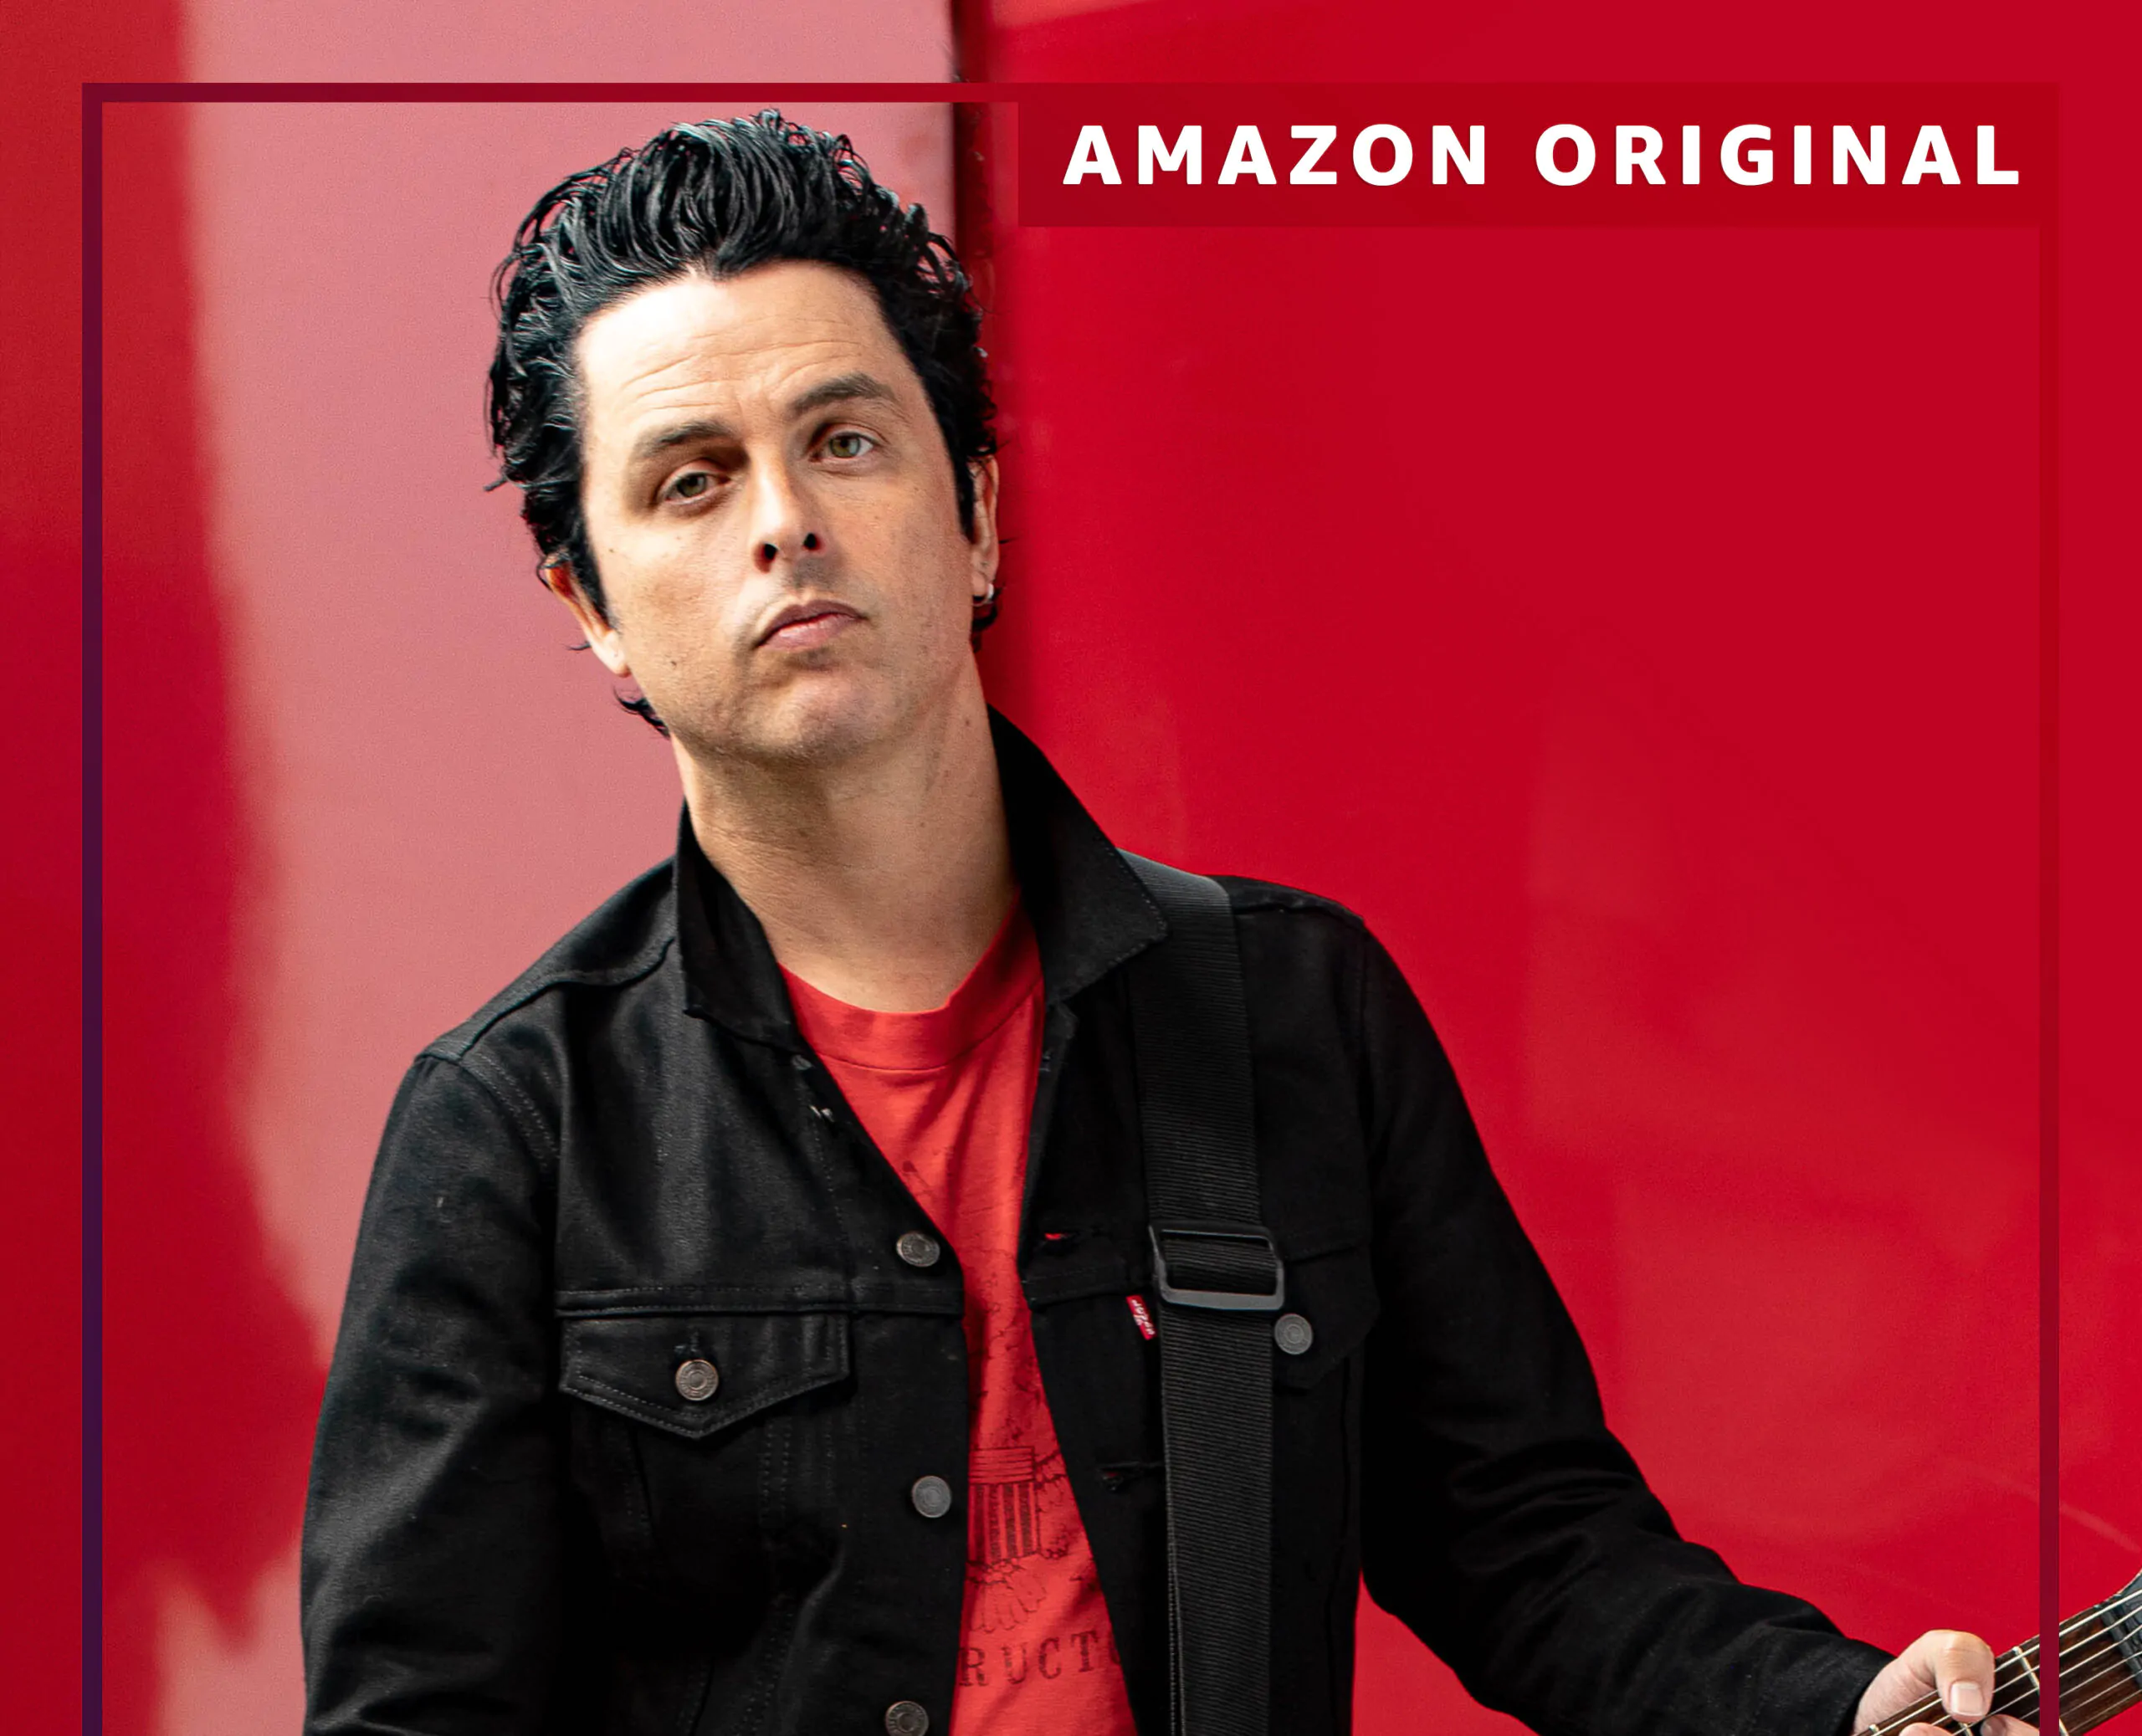 Green Day’s BILLIE JOE ARMSTRONG Releases Amazon Original Cover of Wreckless Eric’s “Whole Wide World”